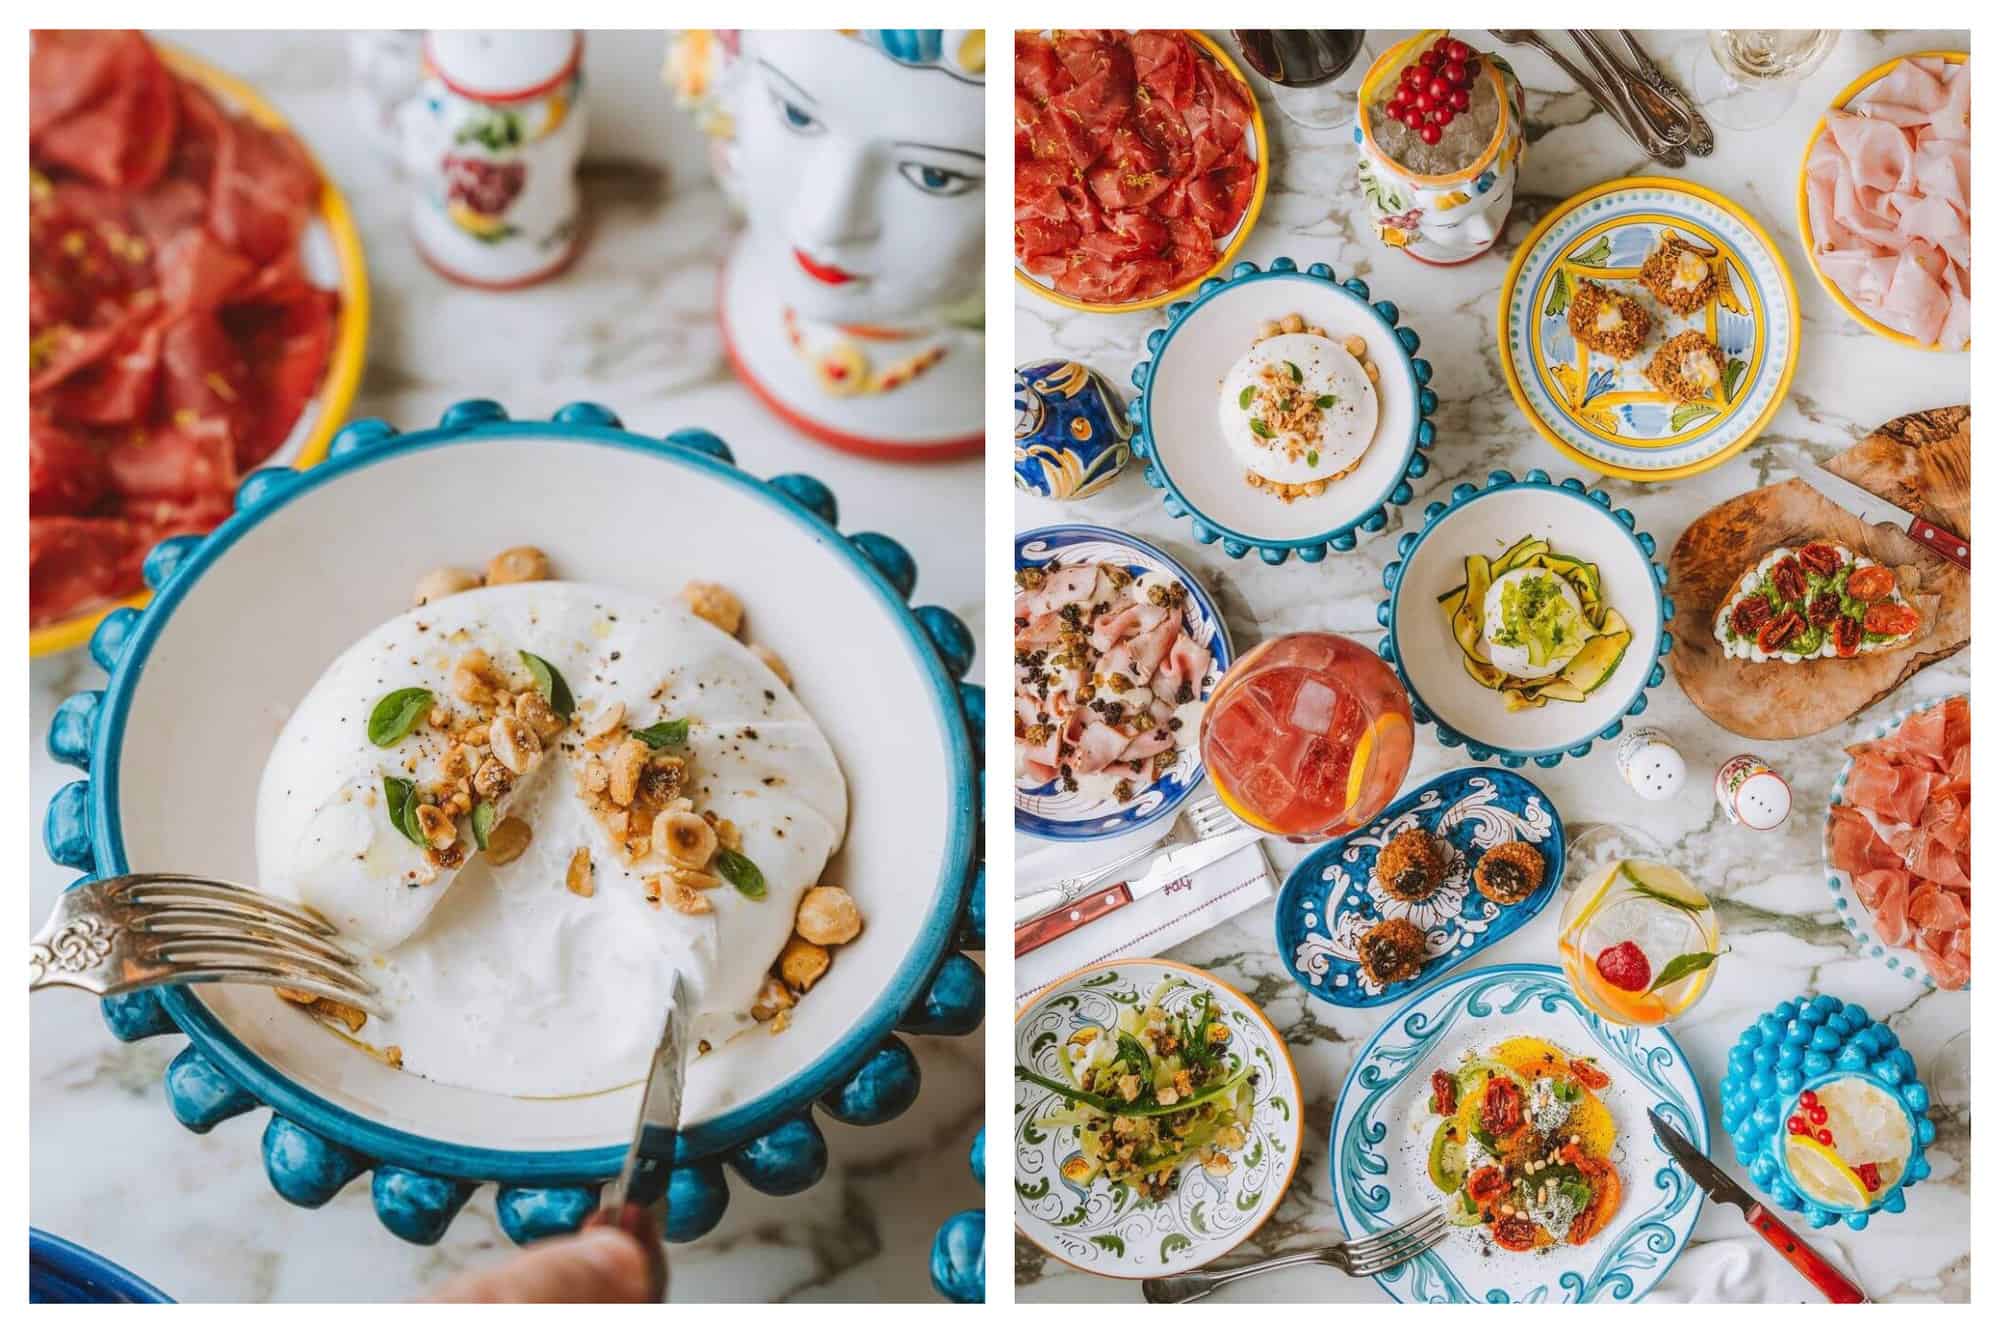 A person cuts into a Burrata with nuts. A colorful spread of anitpasti and salads.